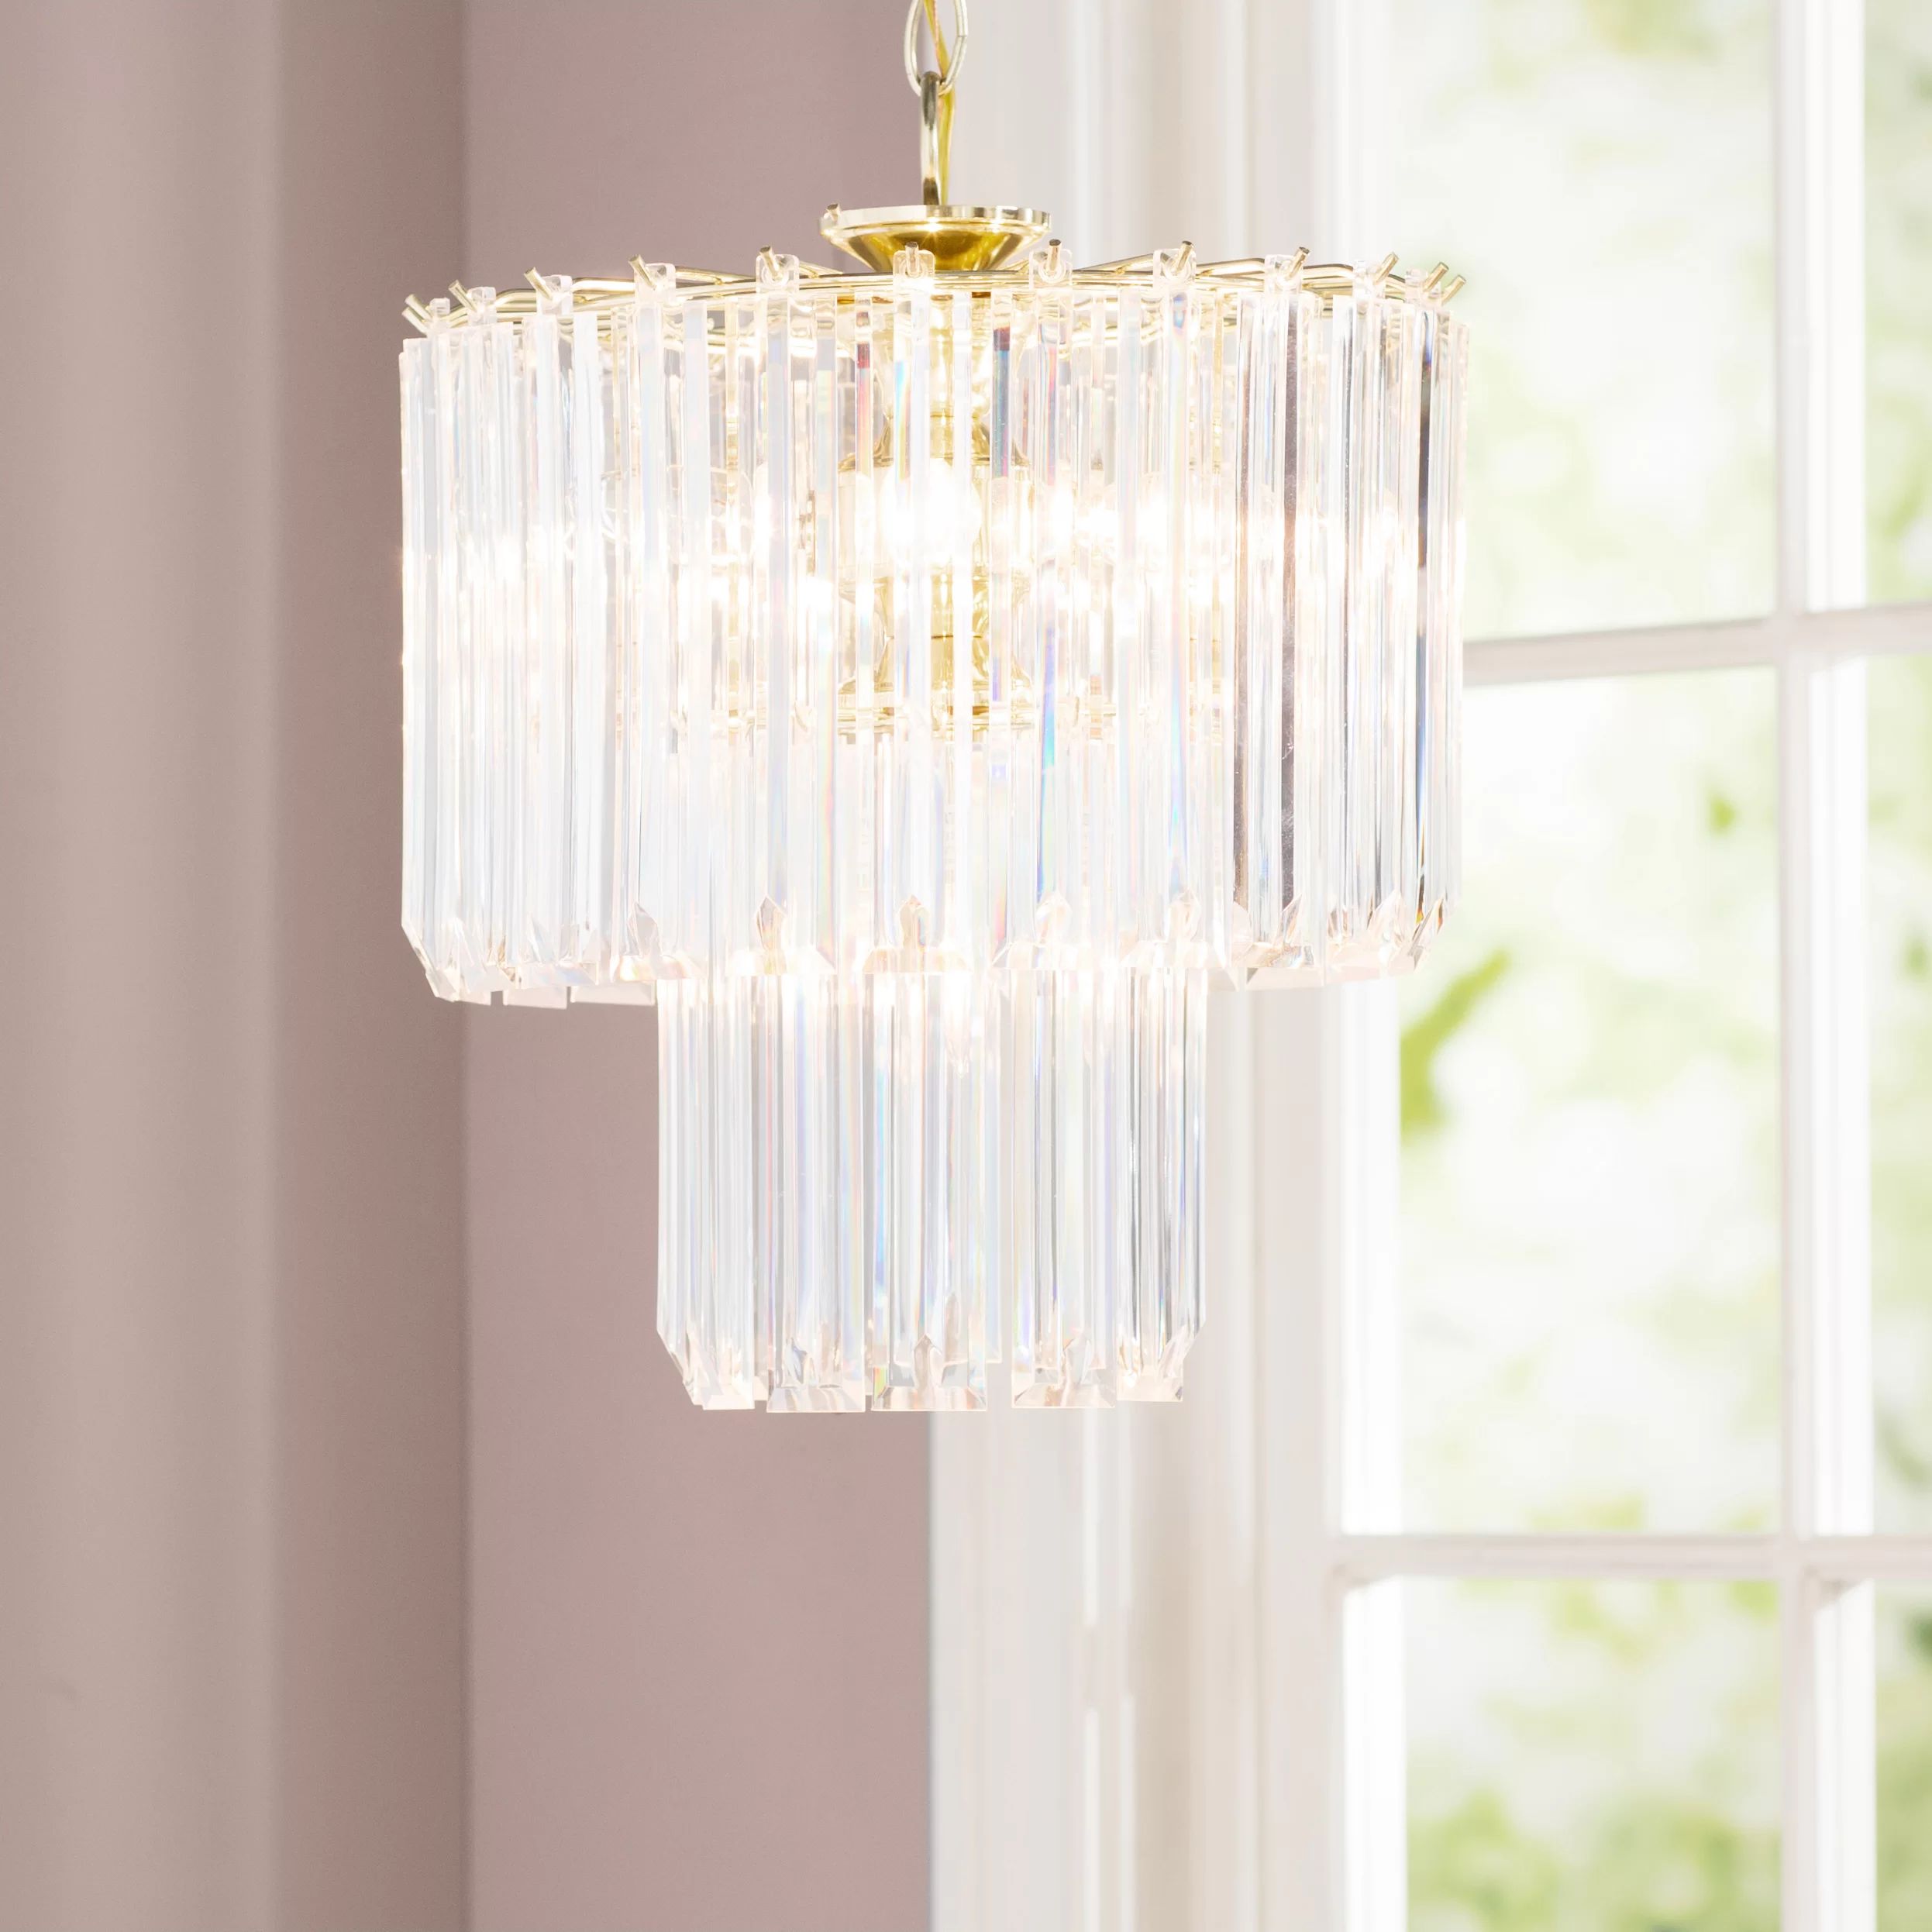 Acton 5 - Light Acrylic Dimmable Tiered Chandelier | Wayfair North America